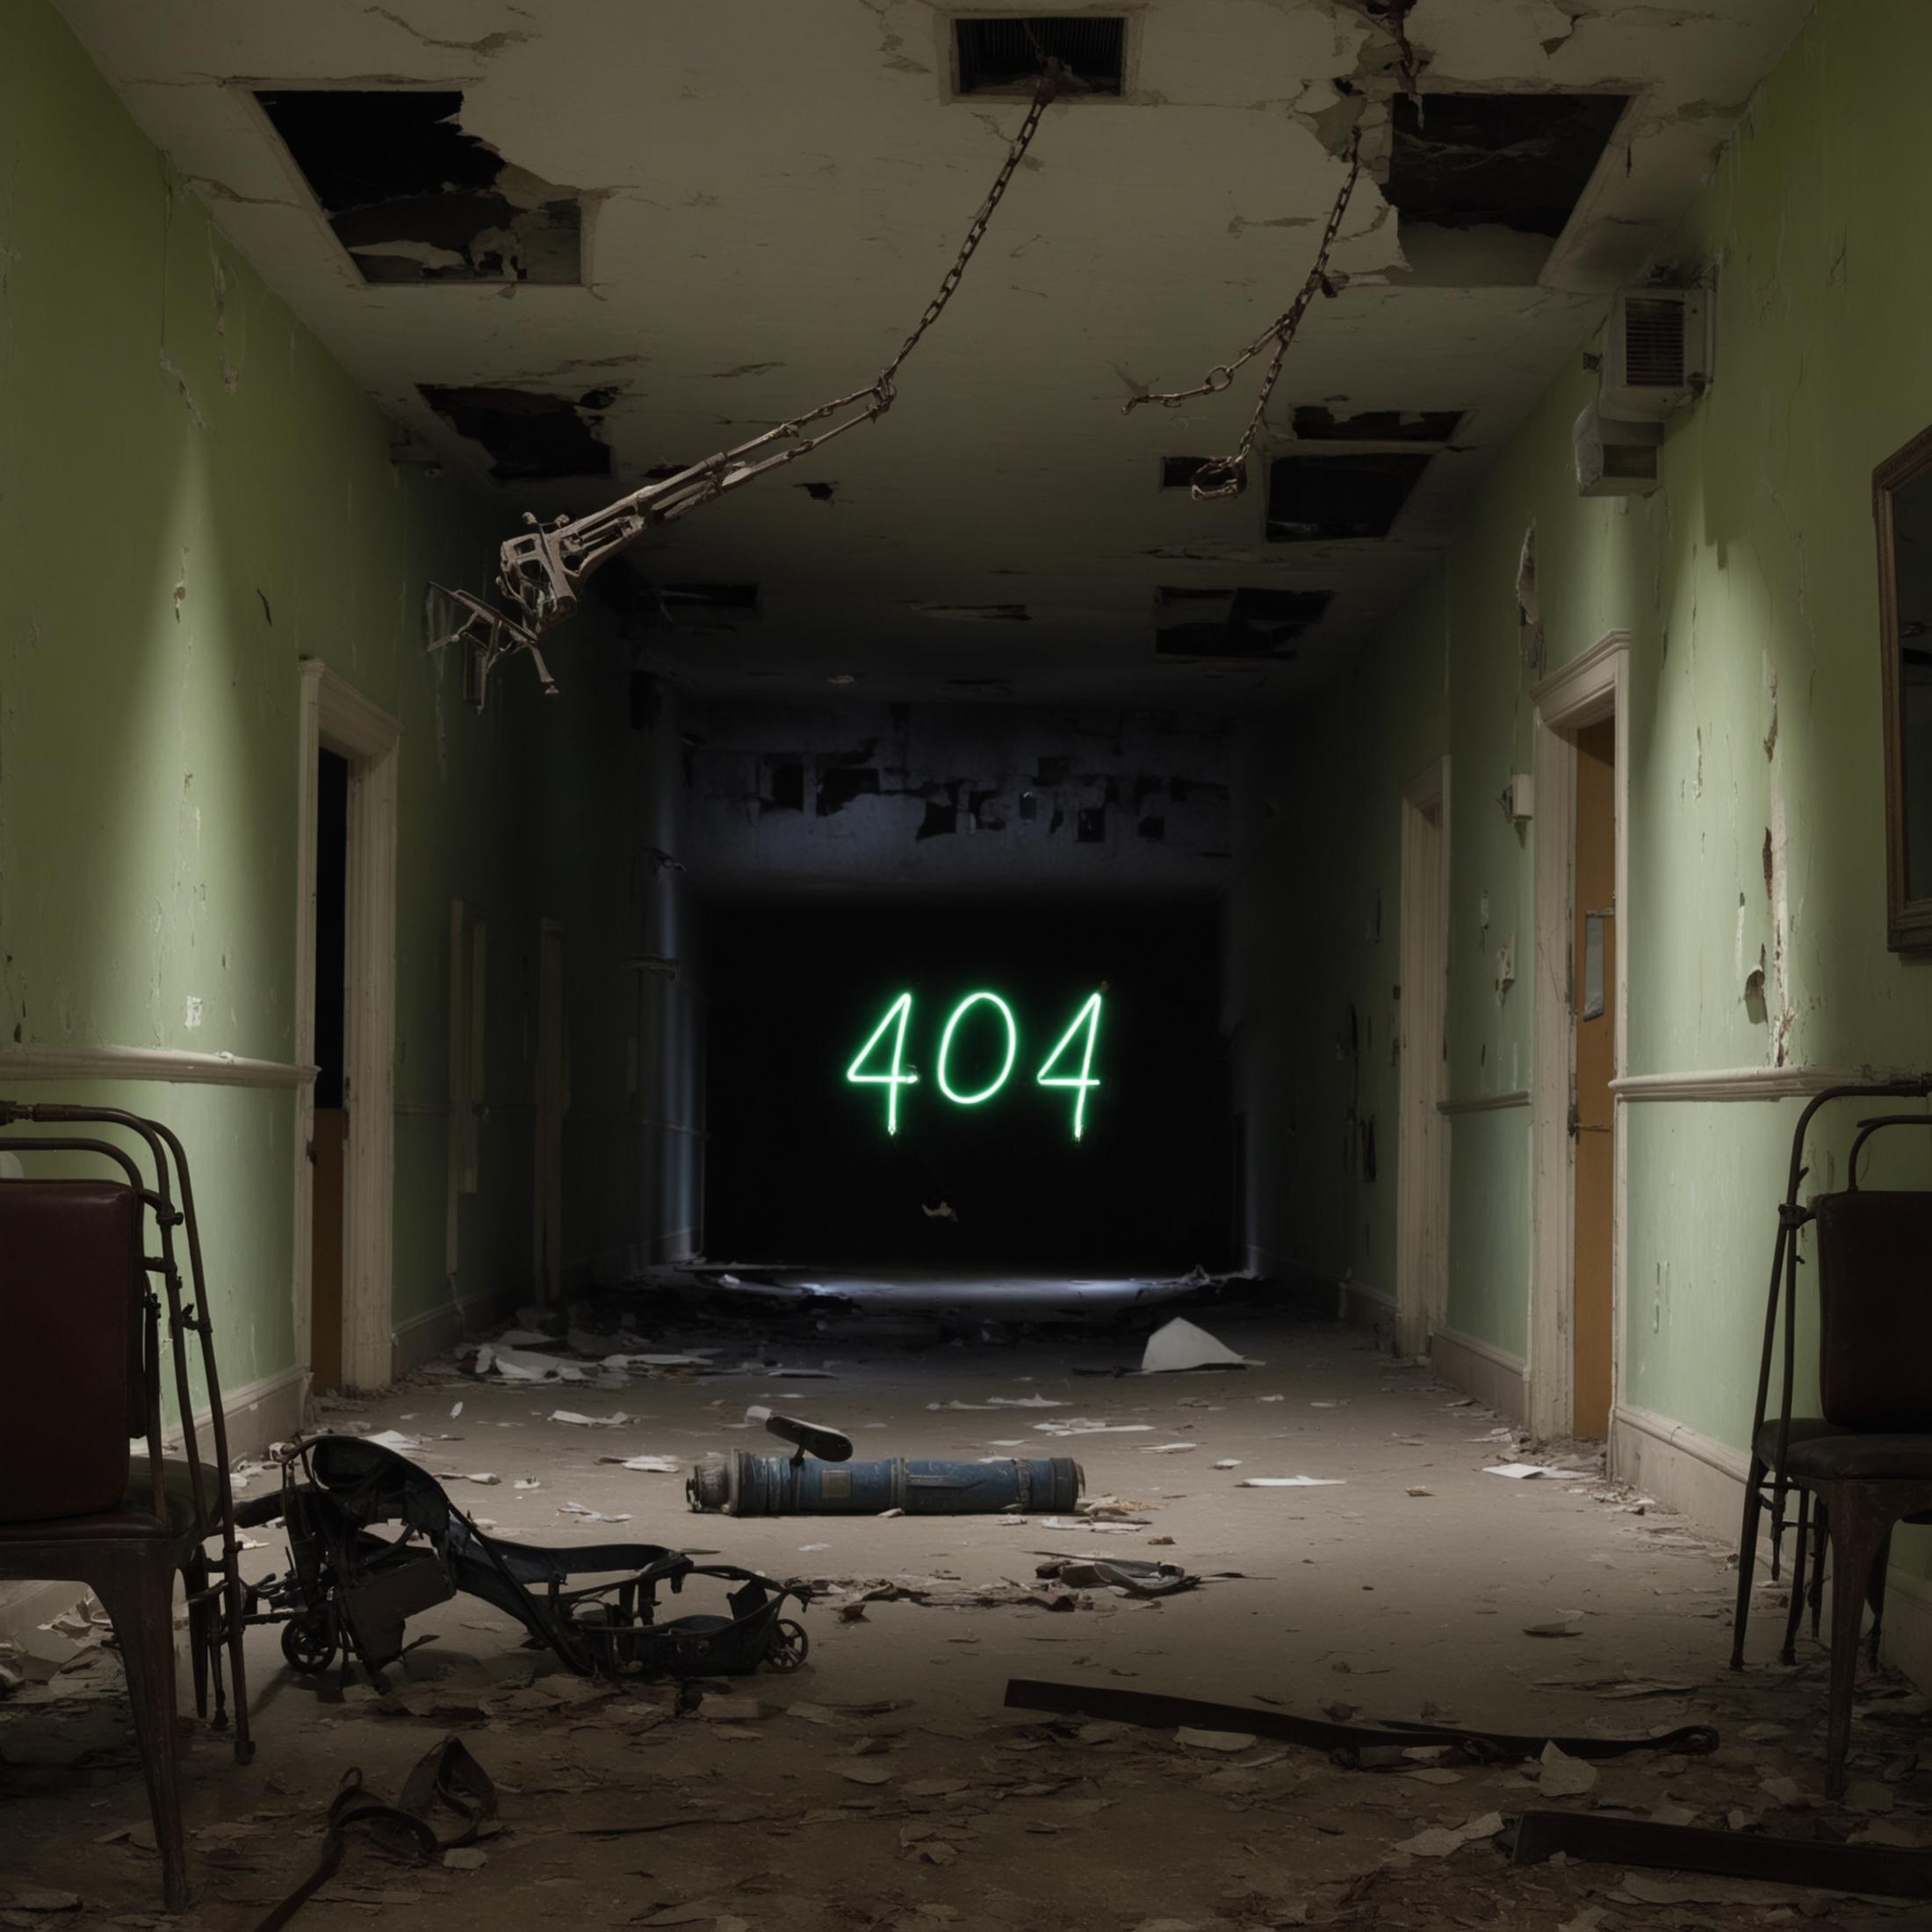 Abandoned hallway with a 404 sign and a bicycle.